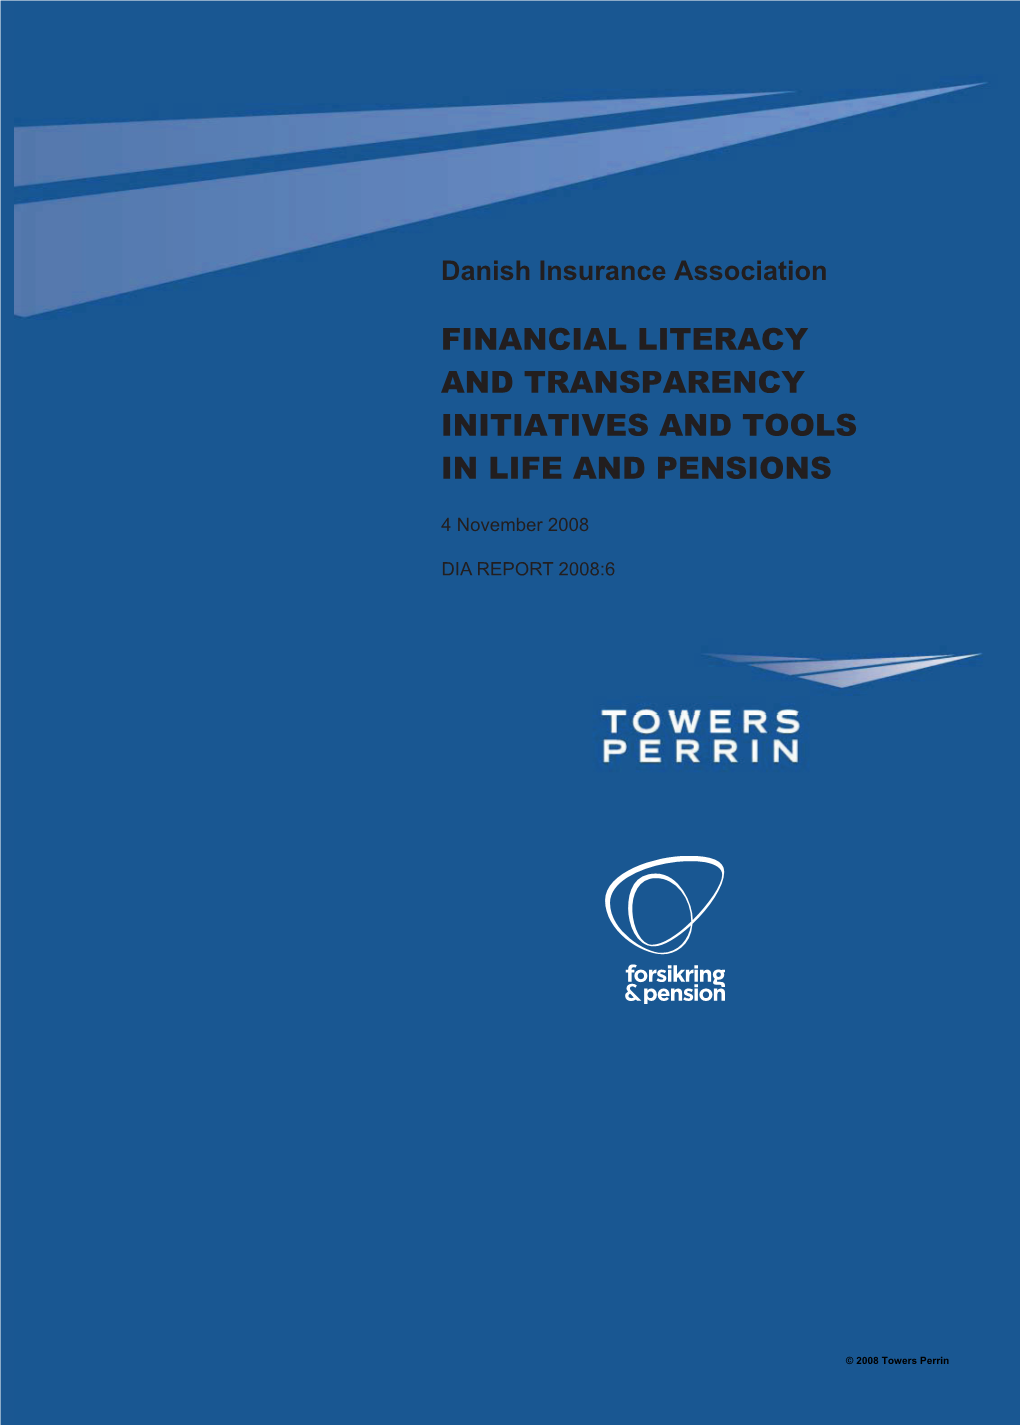 Financial Literacy and Transparency Initiatives and Tools in Life and Pensions